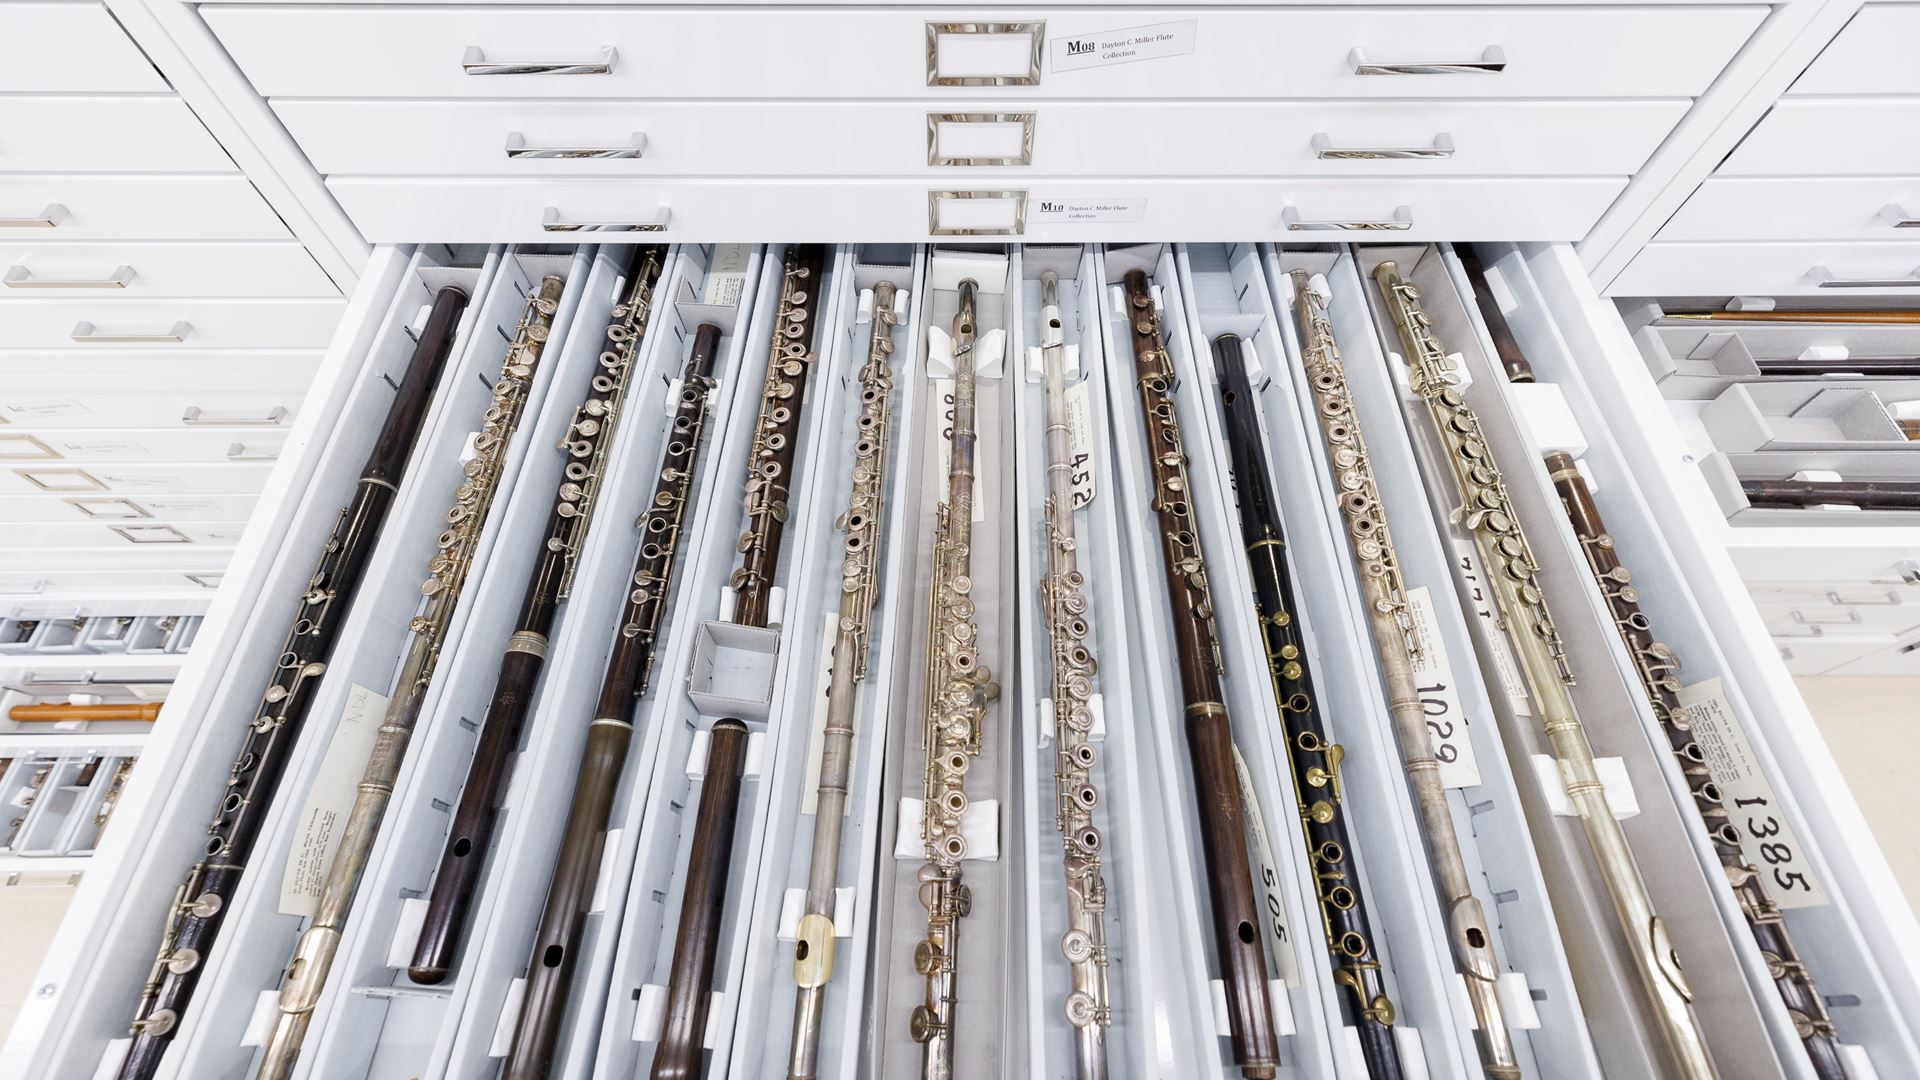 Live at the Library to Feature Giant Bible of Mainz, Flutes from the Vault in October